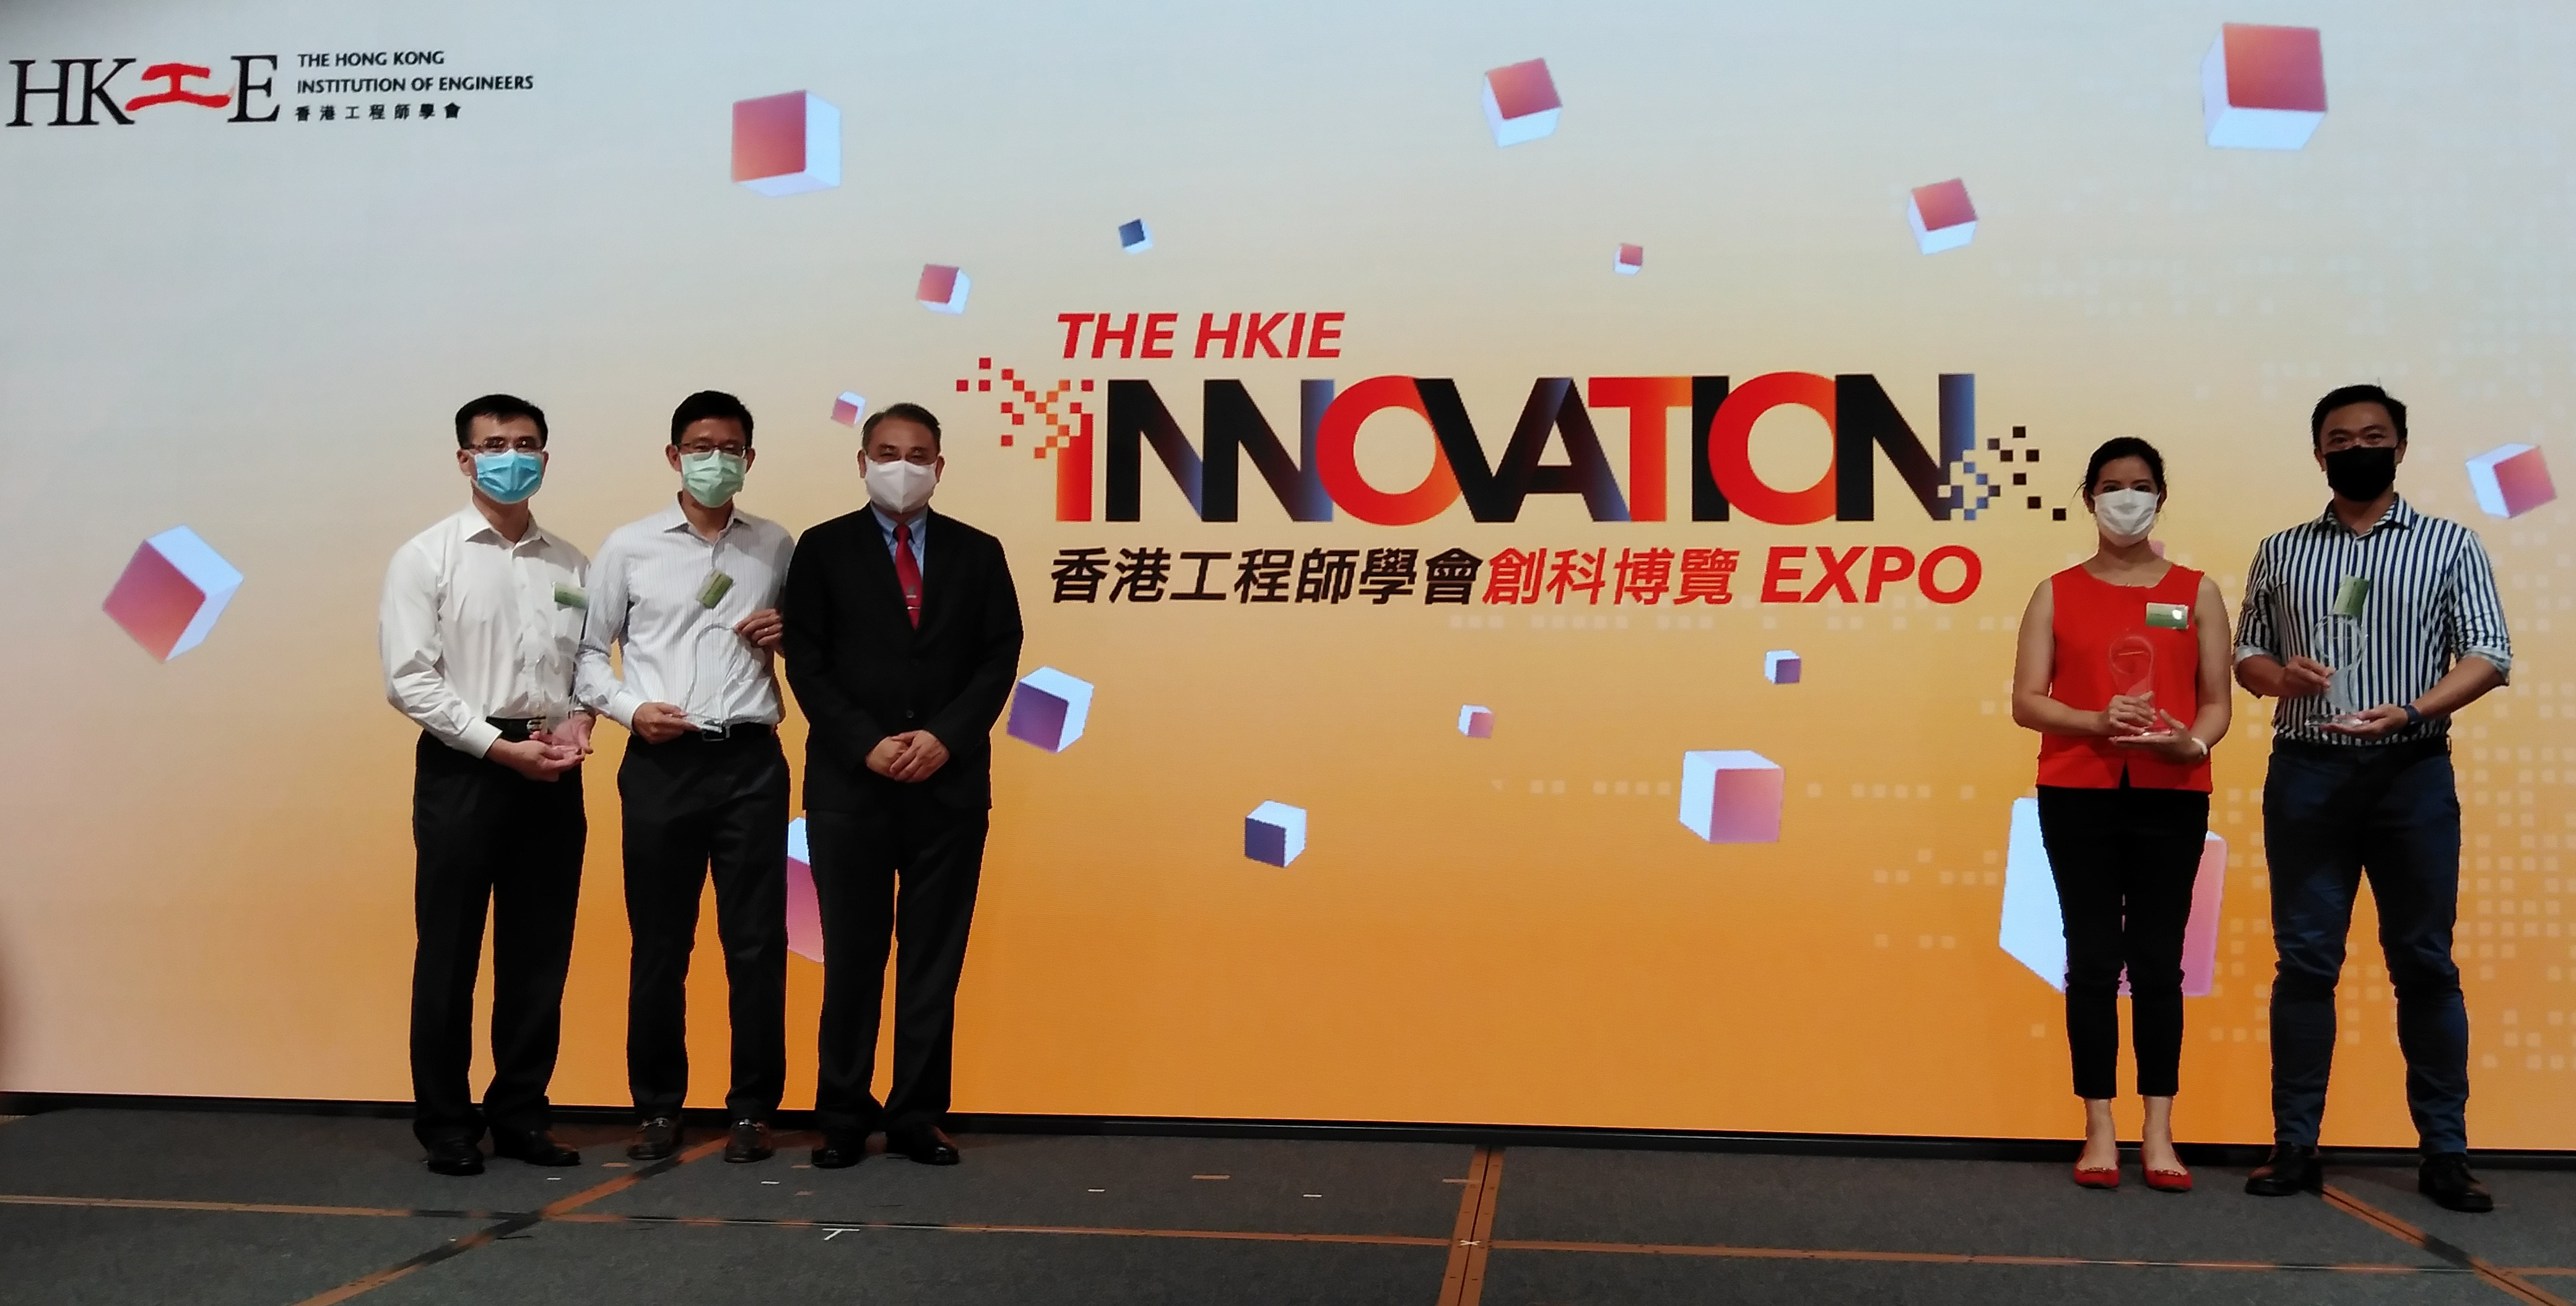 HKIE Innovation Award 2020 - Grand Prize (Category II: An Innovative Application of Engineering Theories)